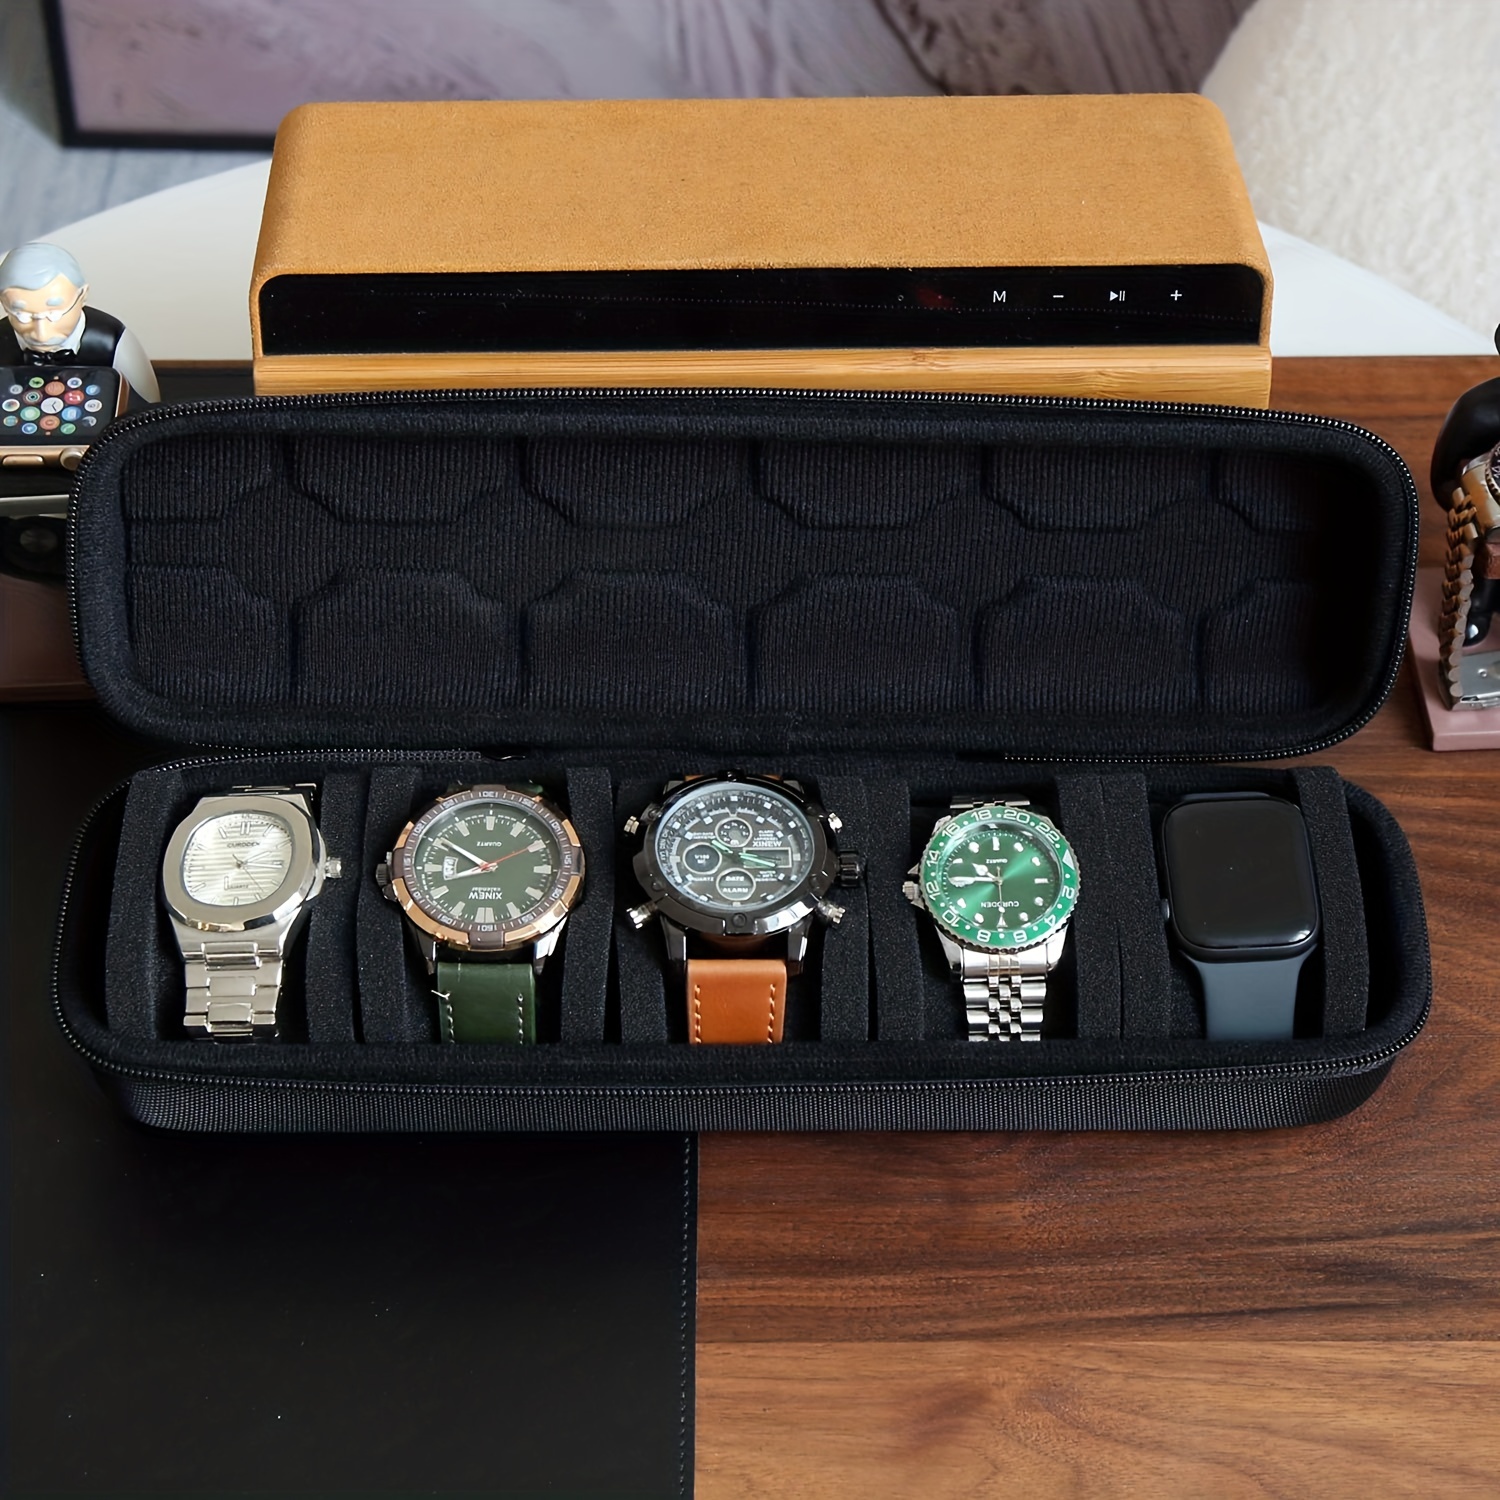 Watch box - Travel watch case for for 2 watches - Black